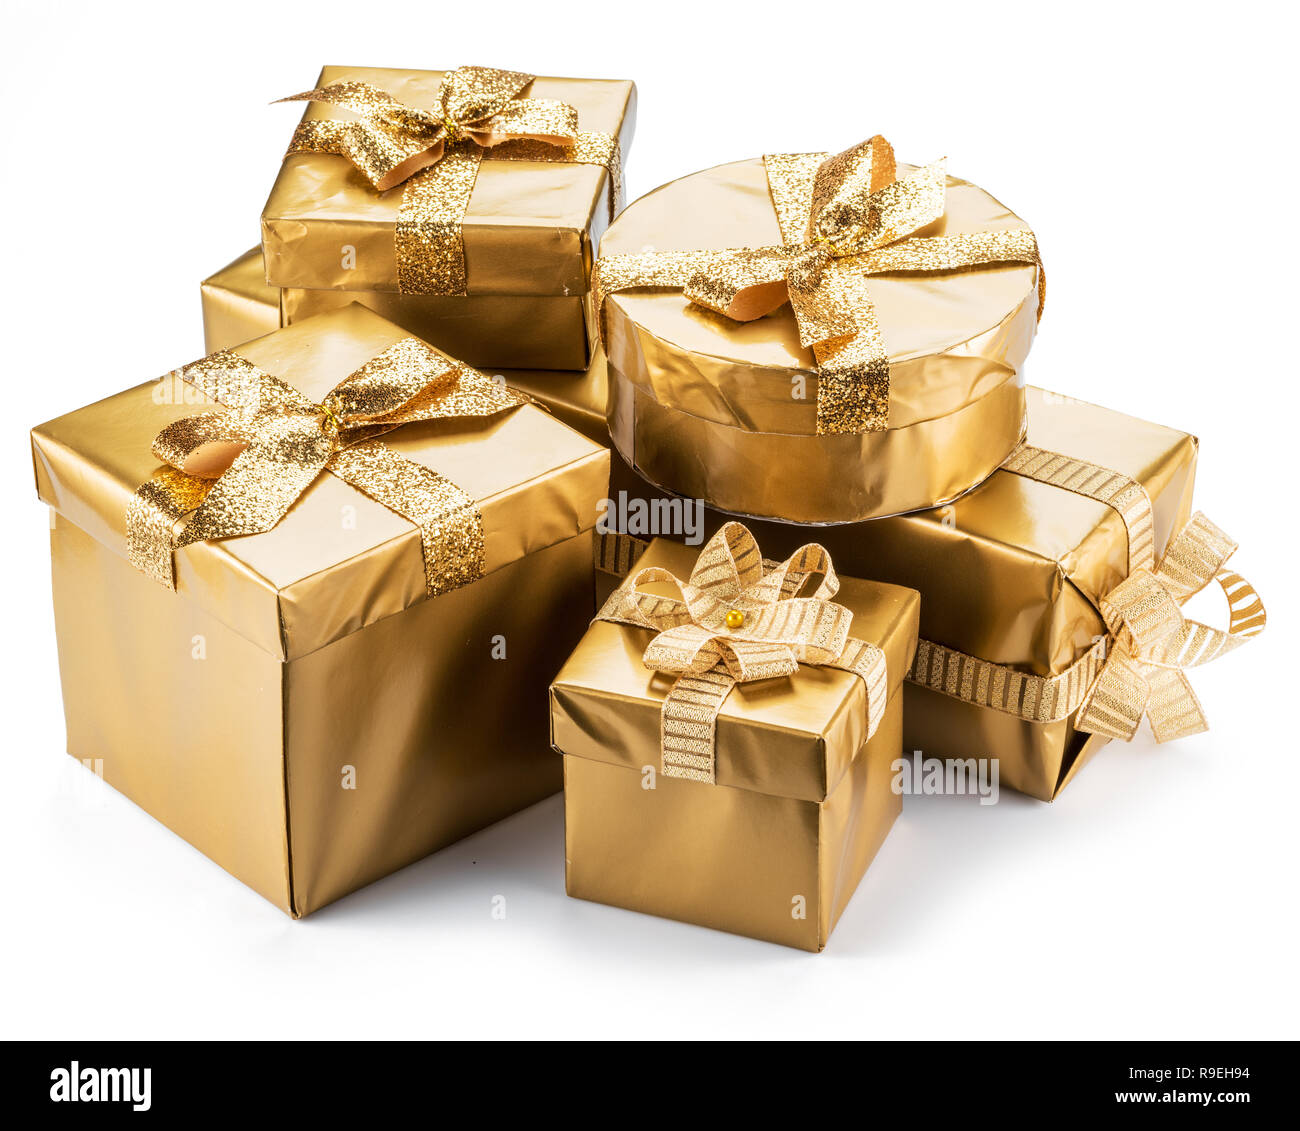 Golden gift boxes as a symbol of wishes and celebration on white background. Stock Photo